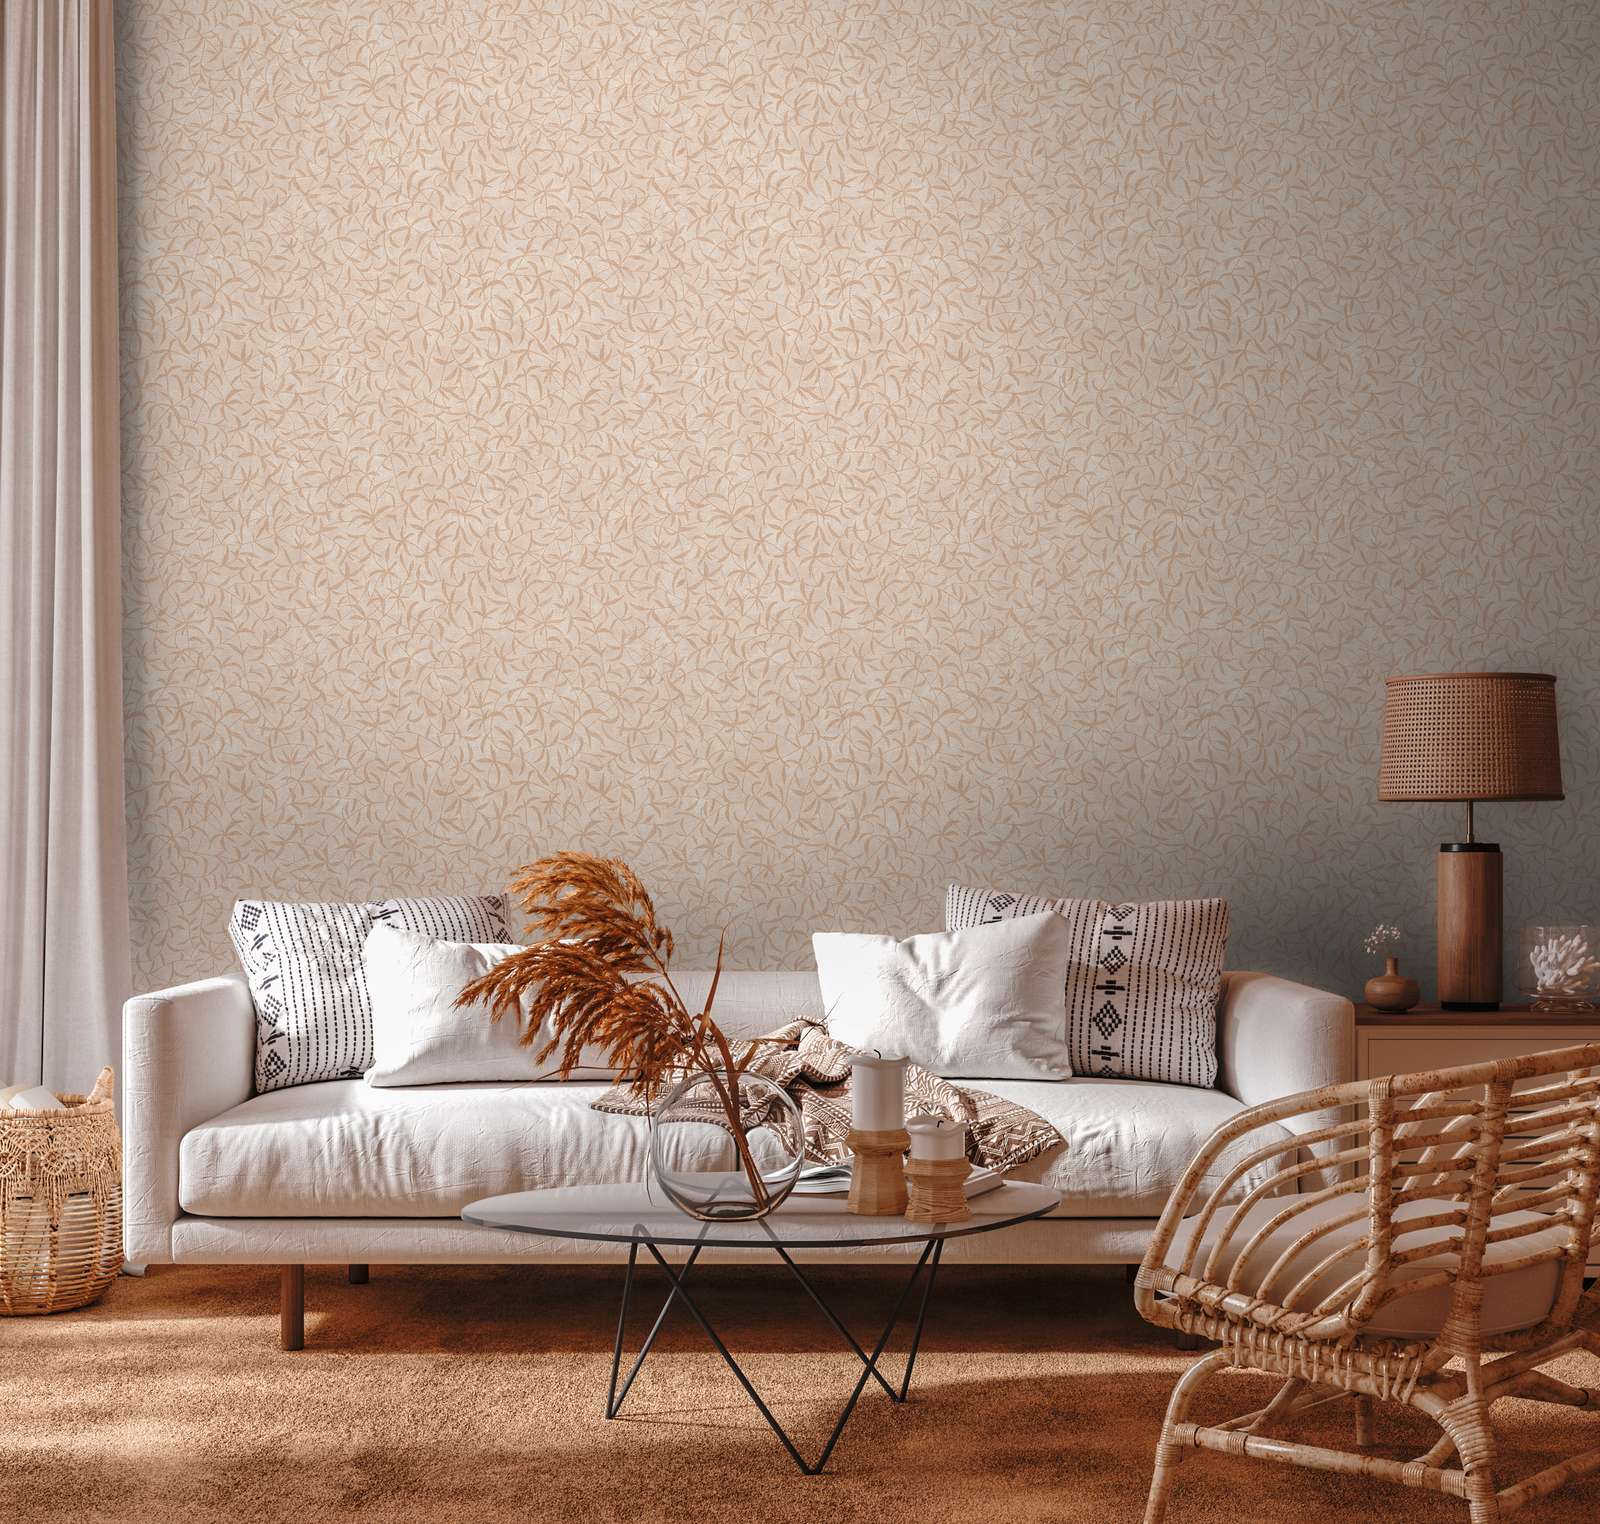             Floral non-woven wallpaper with branches and flowers - cream, beige
        